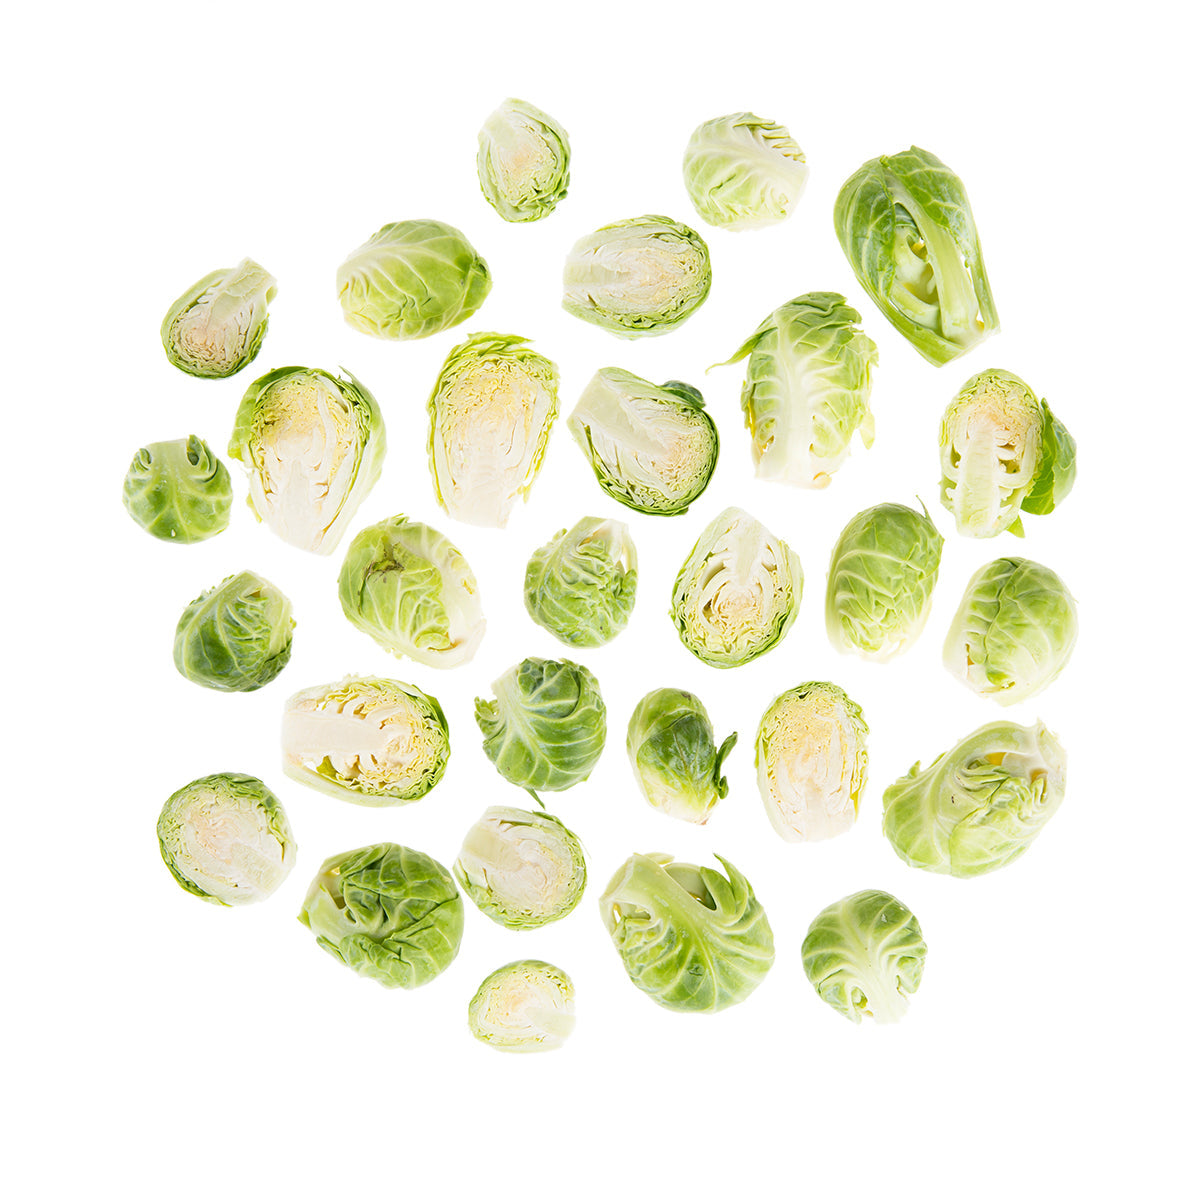 BoxNCase Premium Cleaned Halved Brussels Sprouts 5 LB